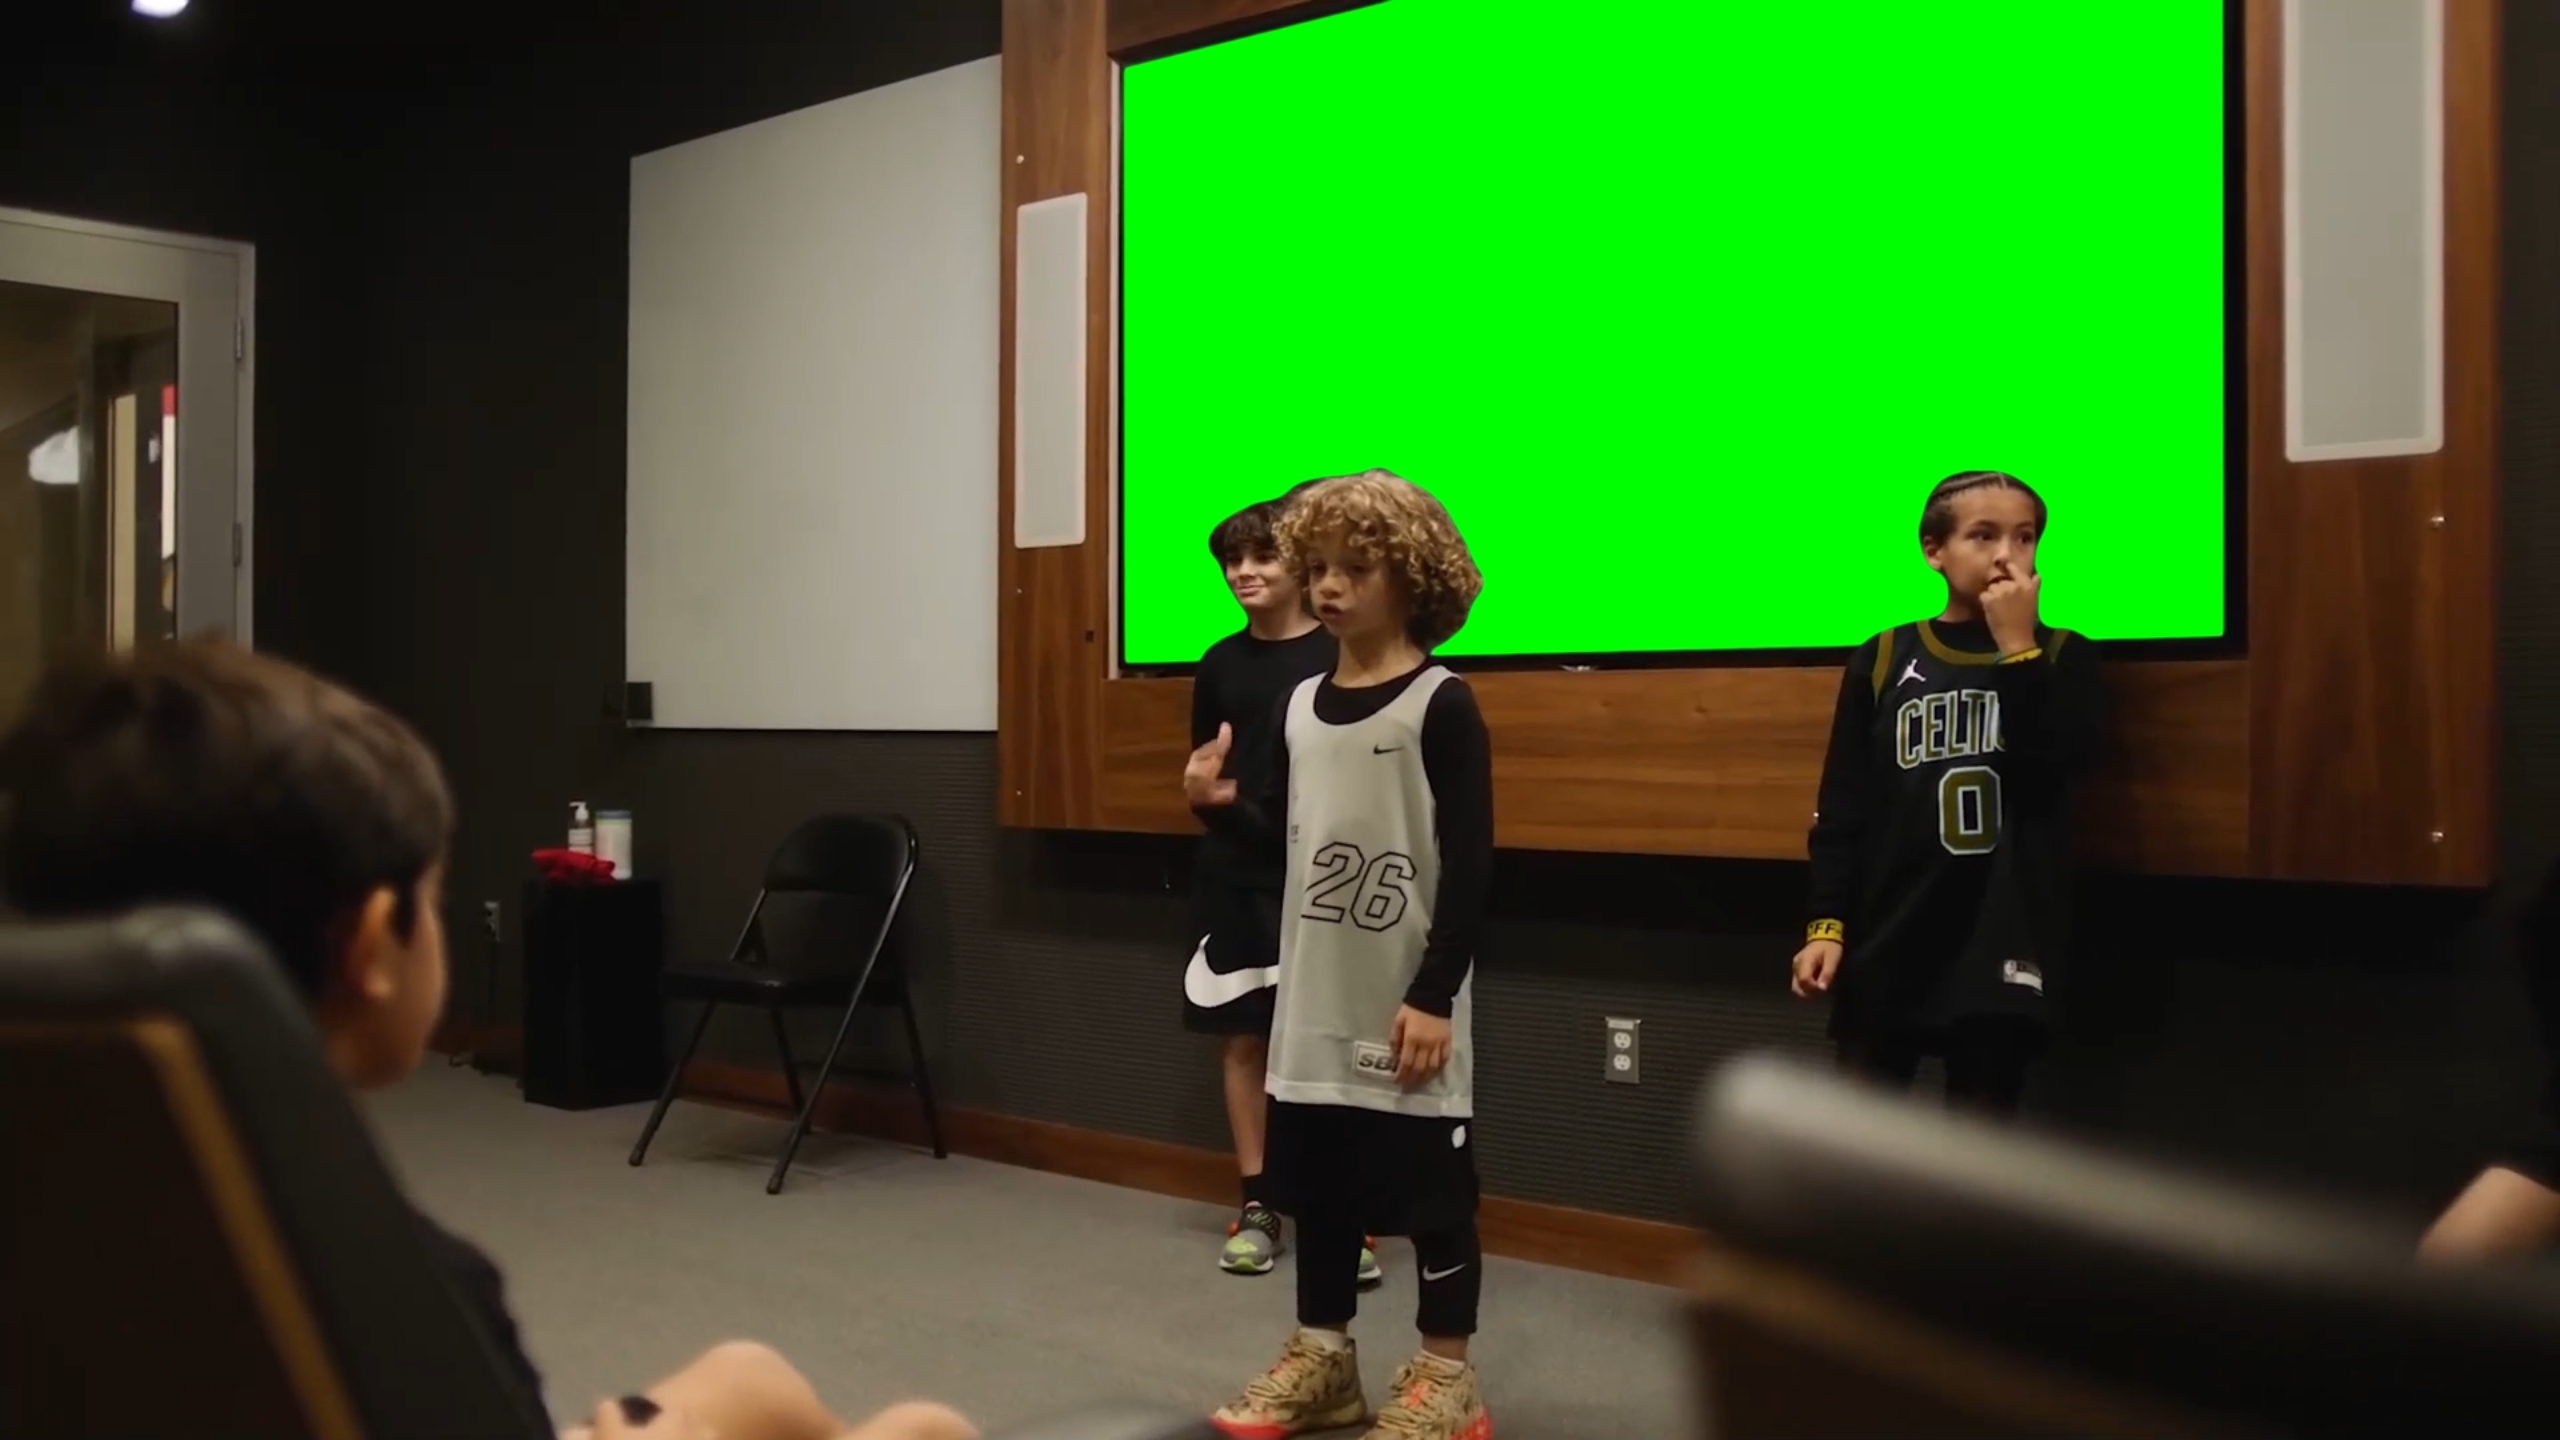 Drake's son Adonis - We have to play better (Green Screen)